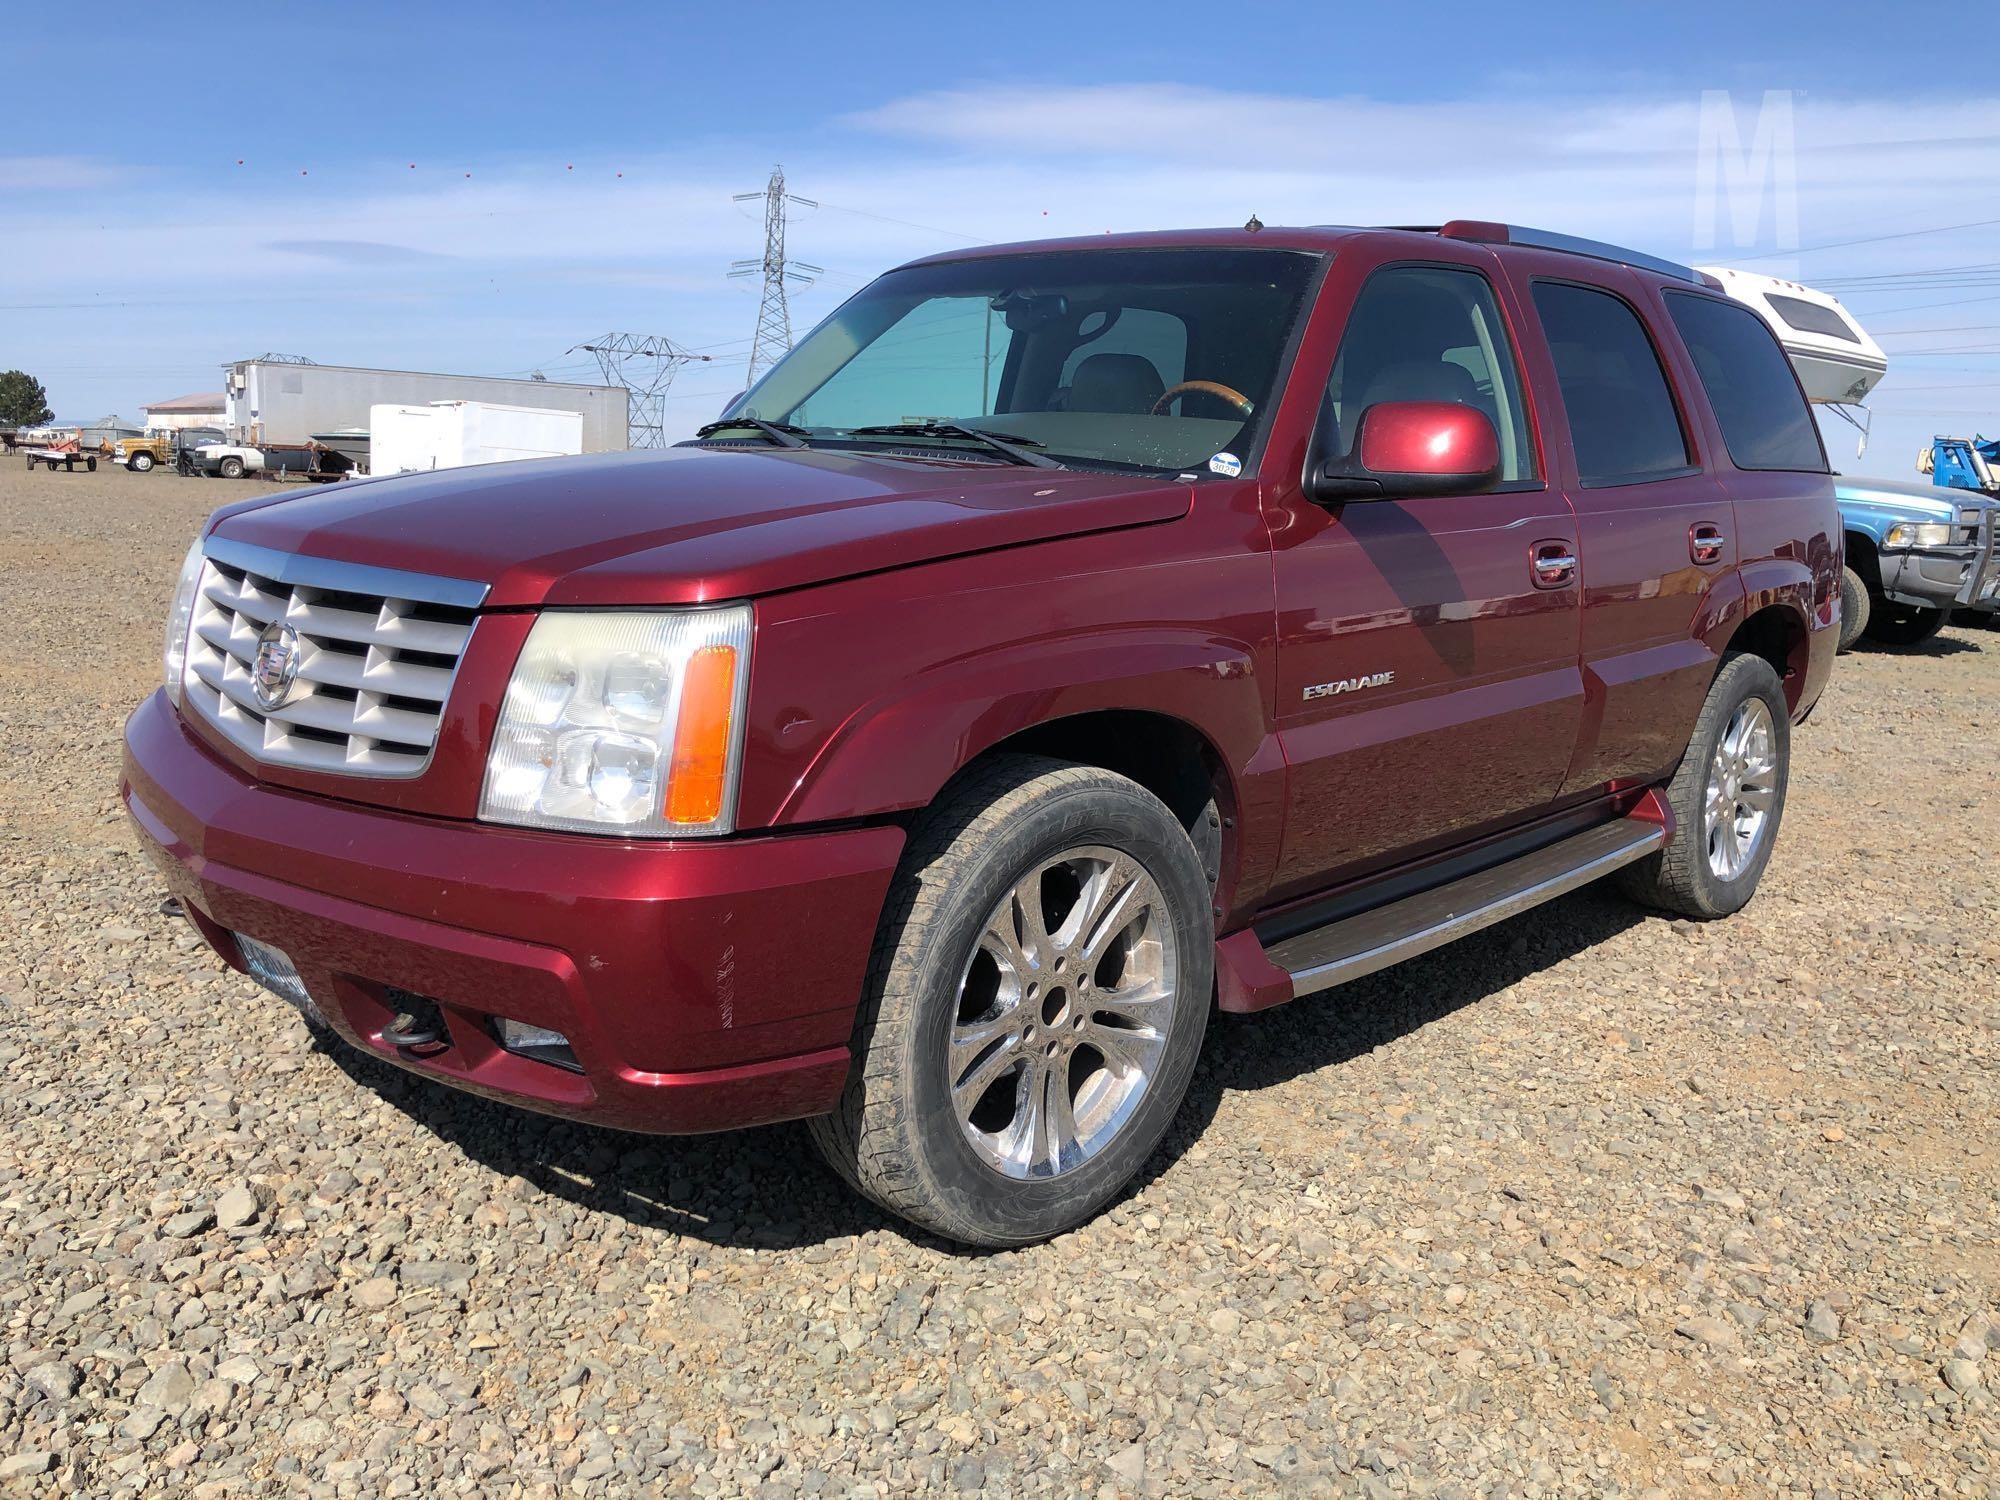 CADILLAC ESCALADE Other Auction Results - 1 Listings | MarketBook 